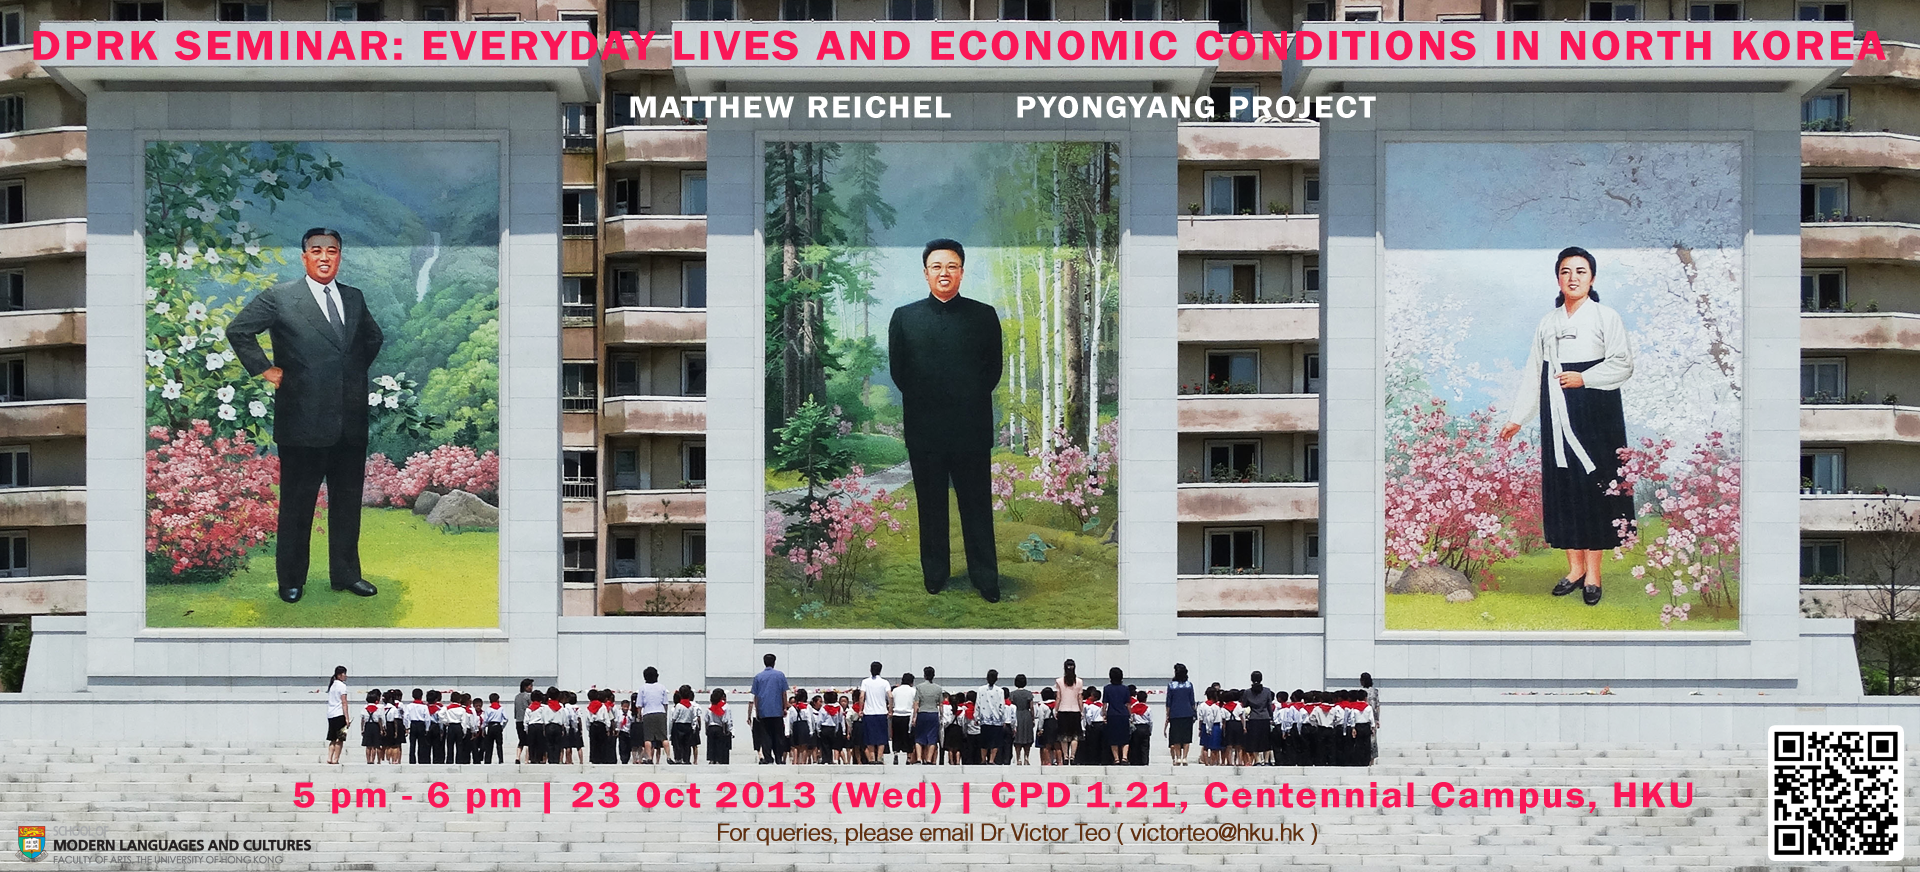 Everyday Lives and Economic Conditions in the DPRK